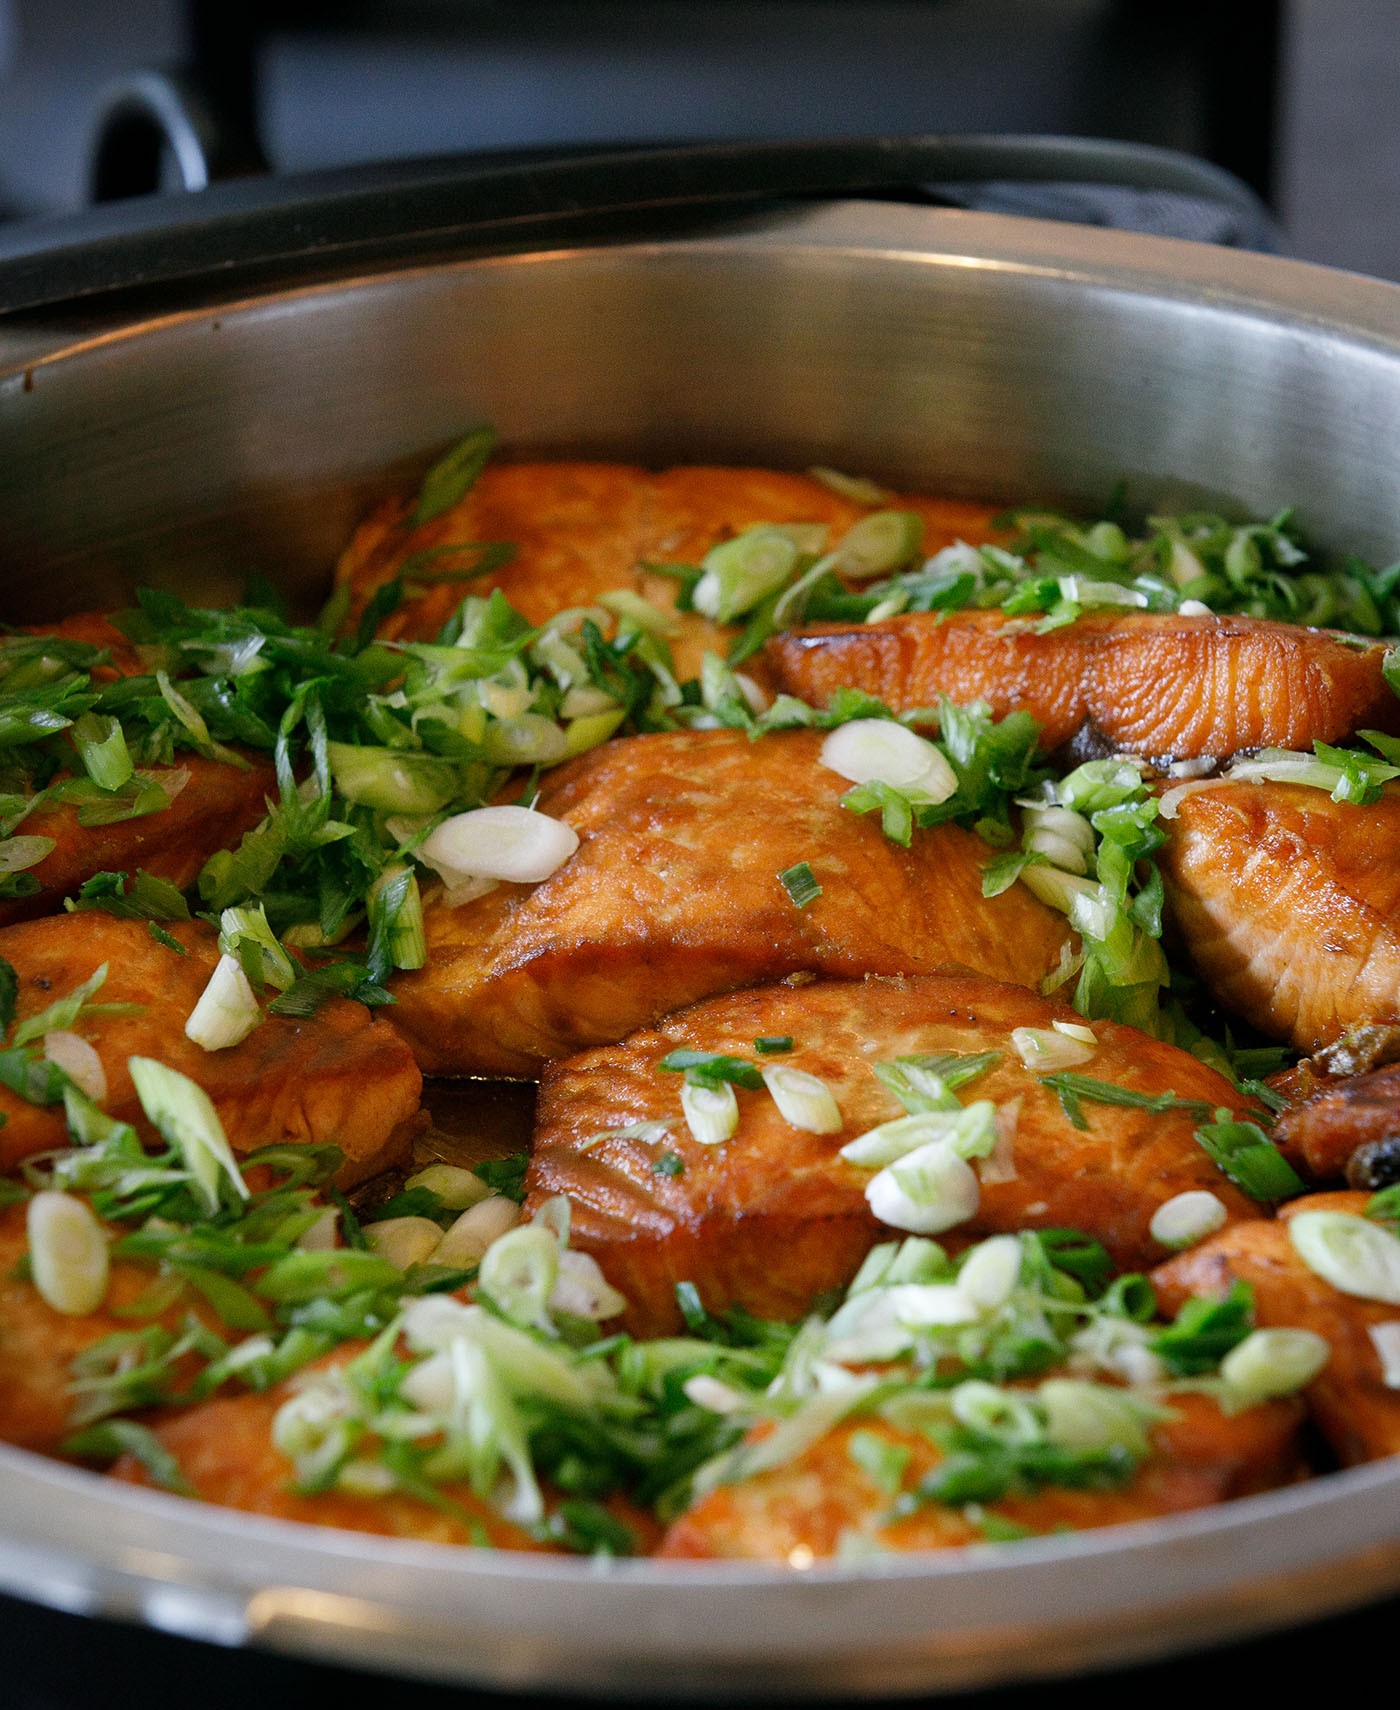 Salmon topped with green onion slices in a black serving dish